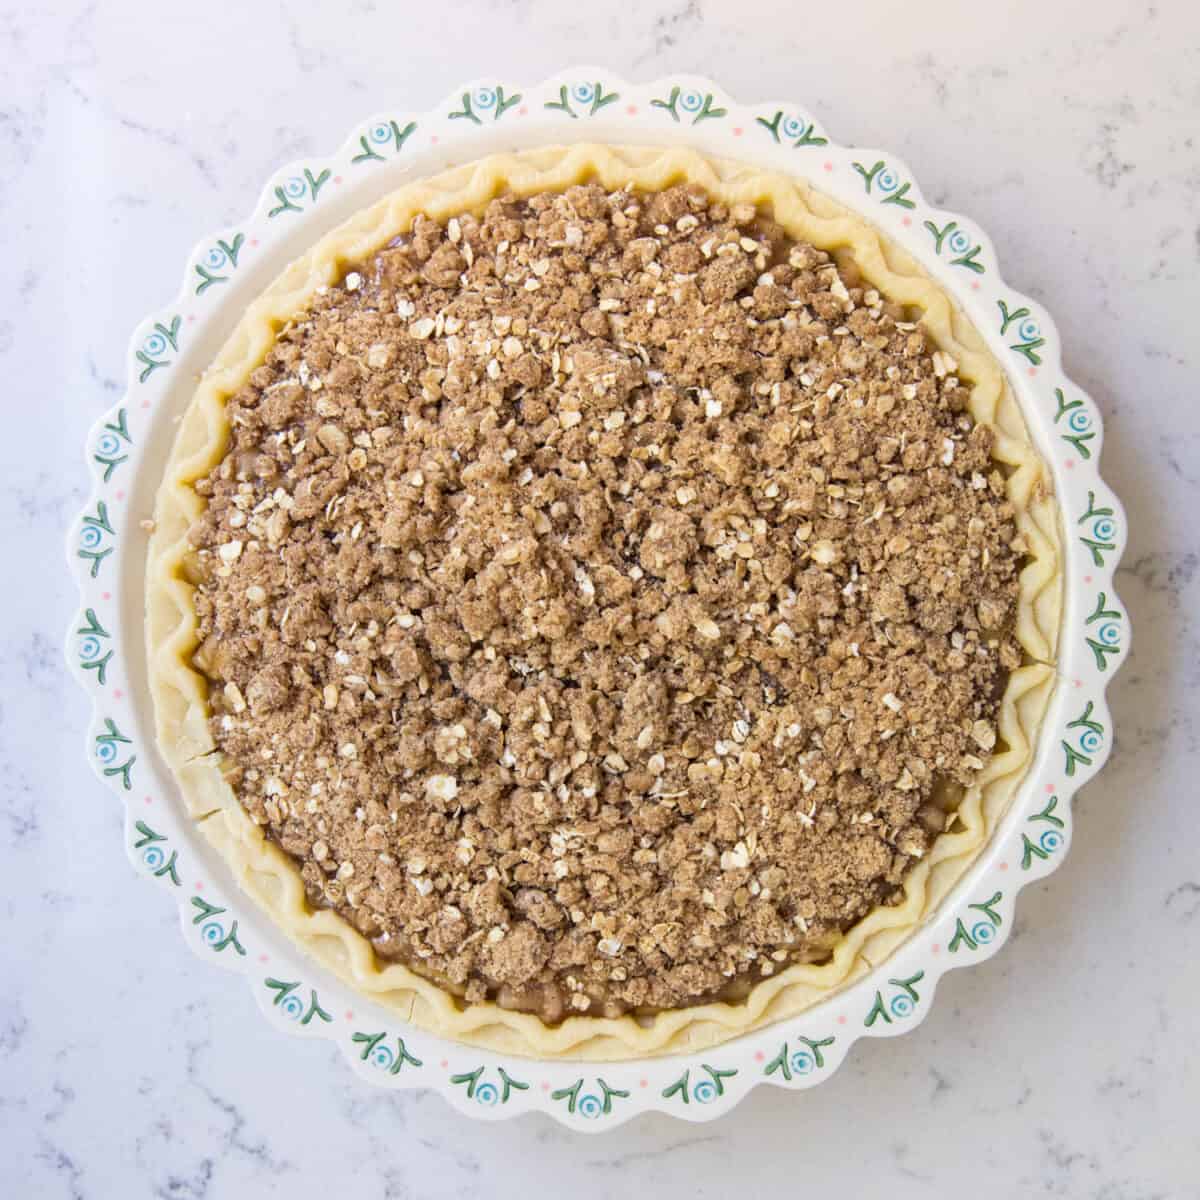 crumb topping on pie crust